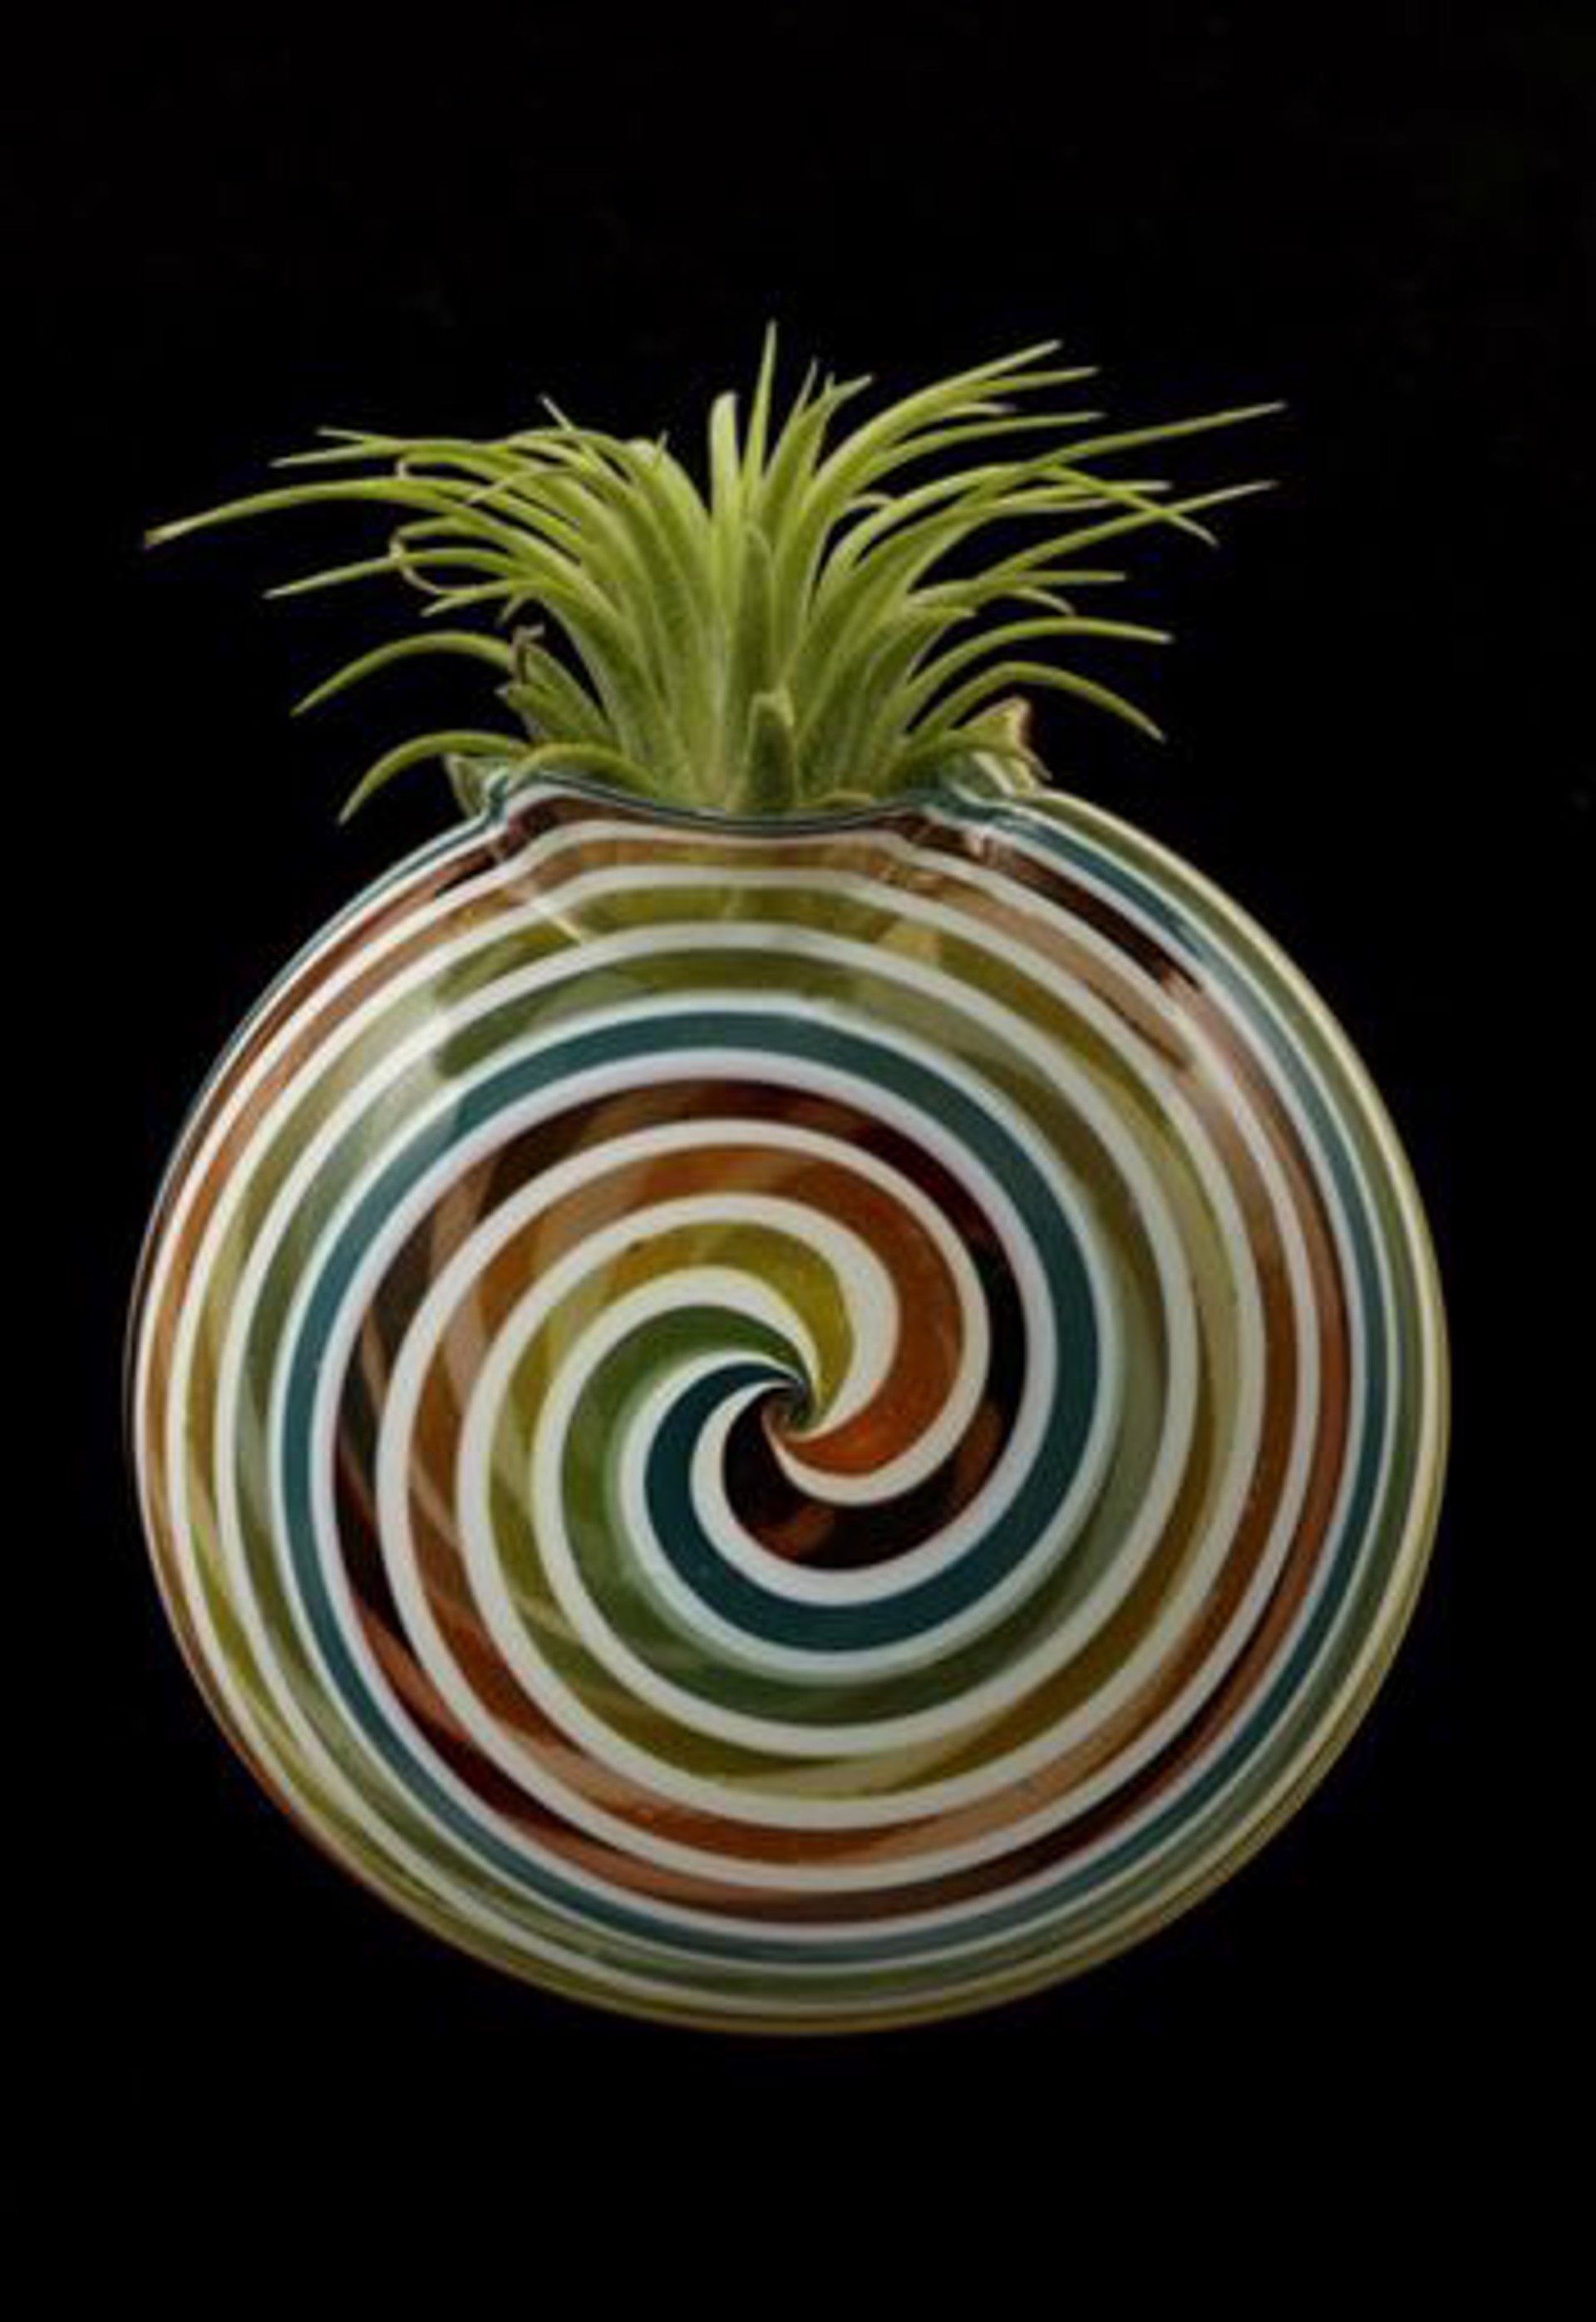 Circular Space Vase for Wall (Several Colors) by Jason Probstein